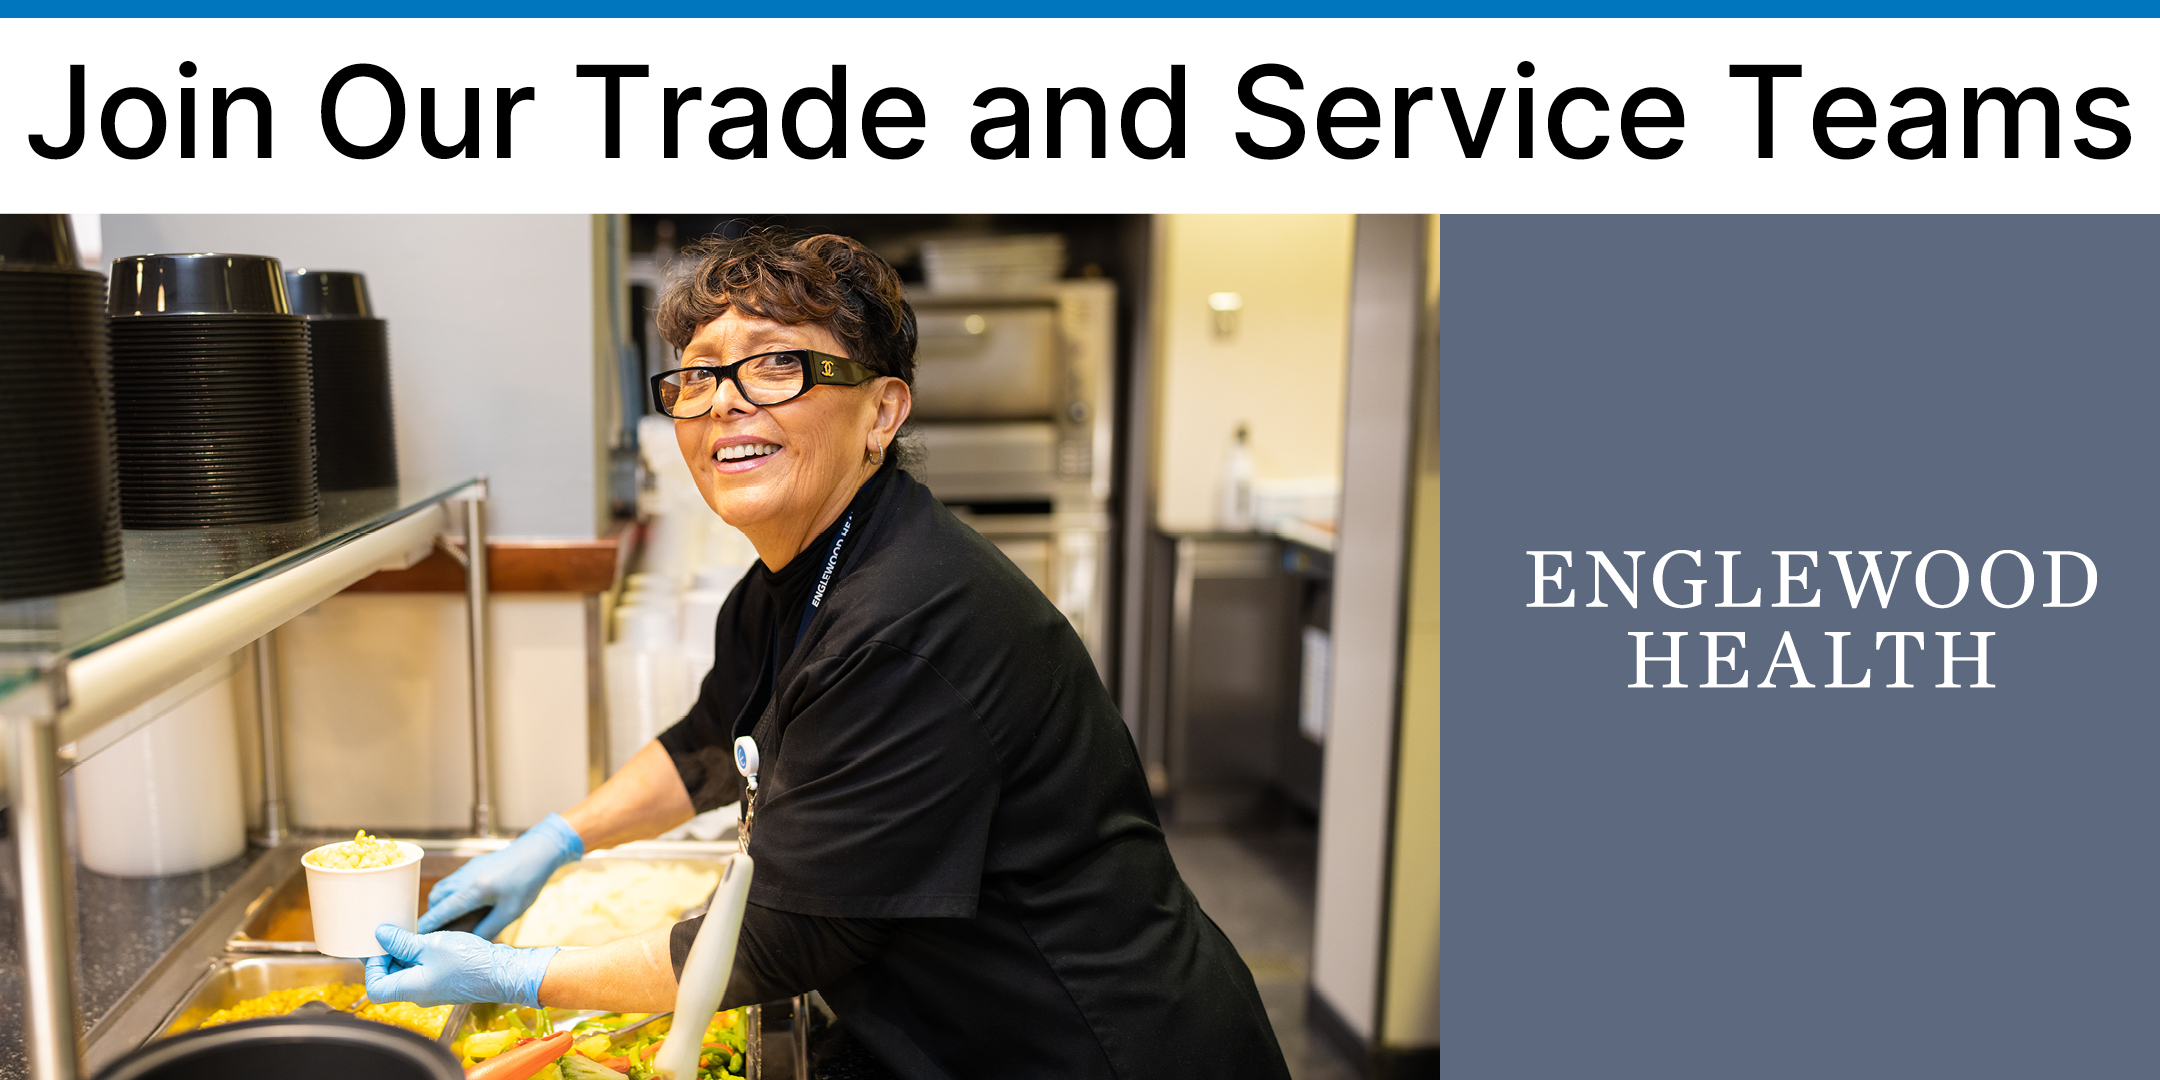 More info: Service and Trade Open House Event